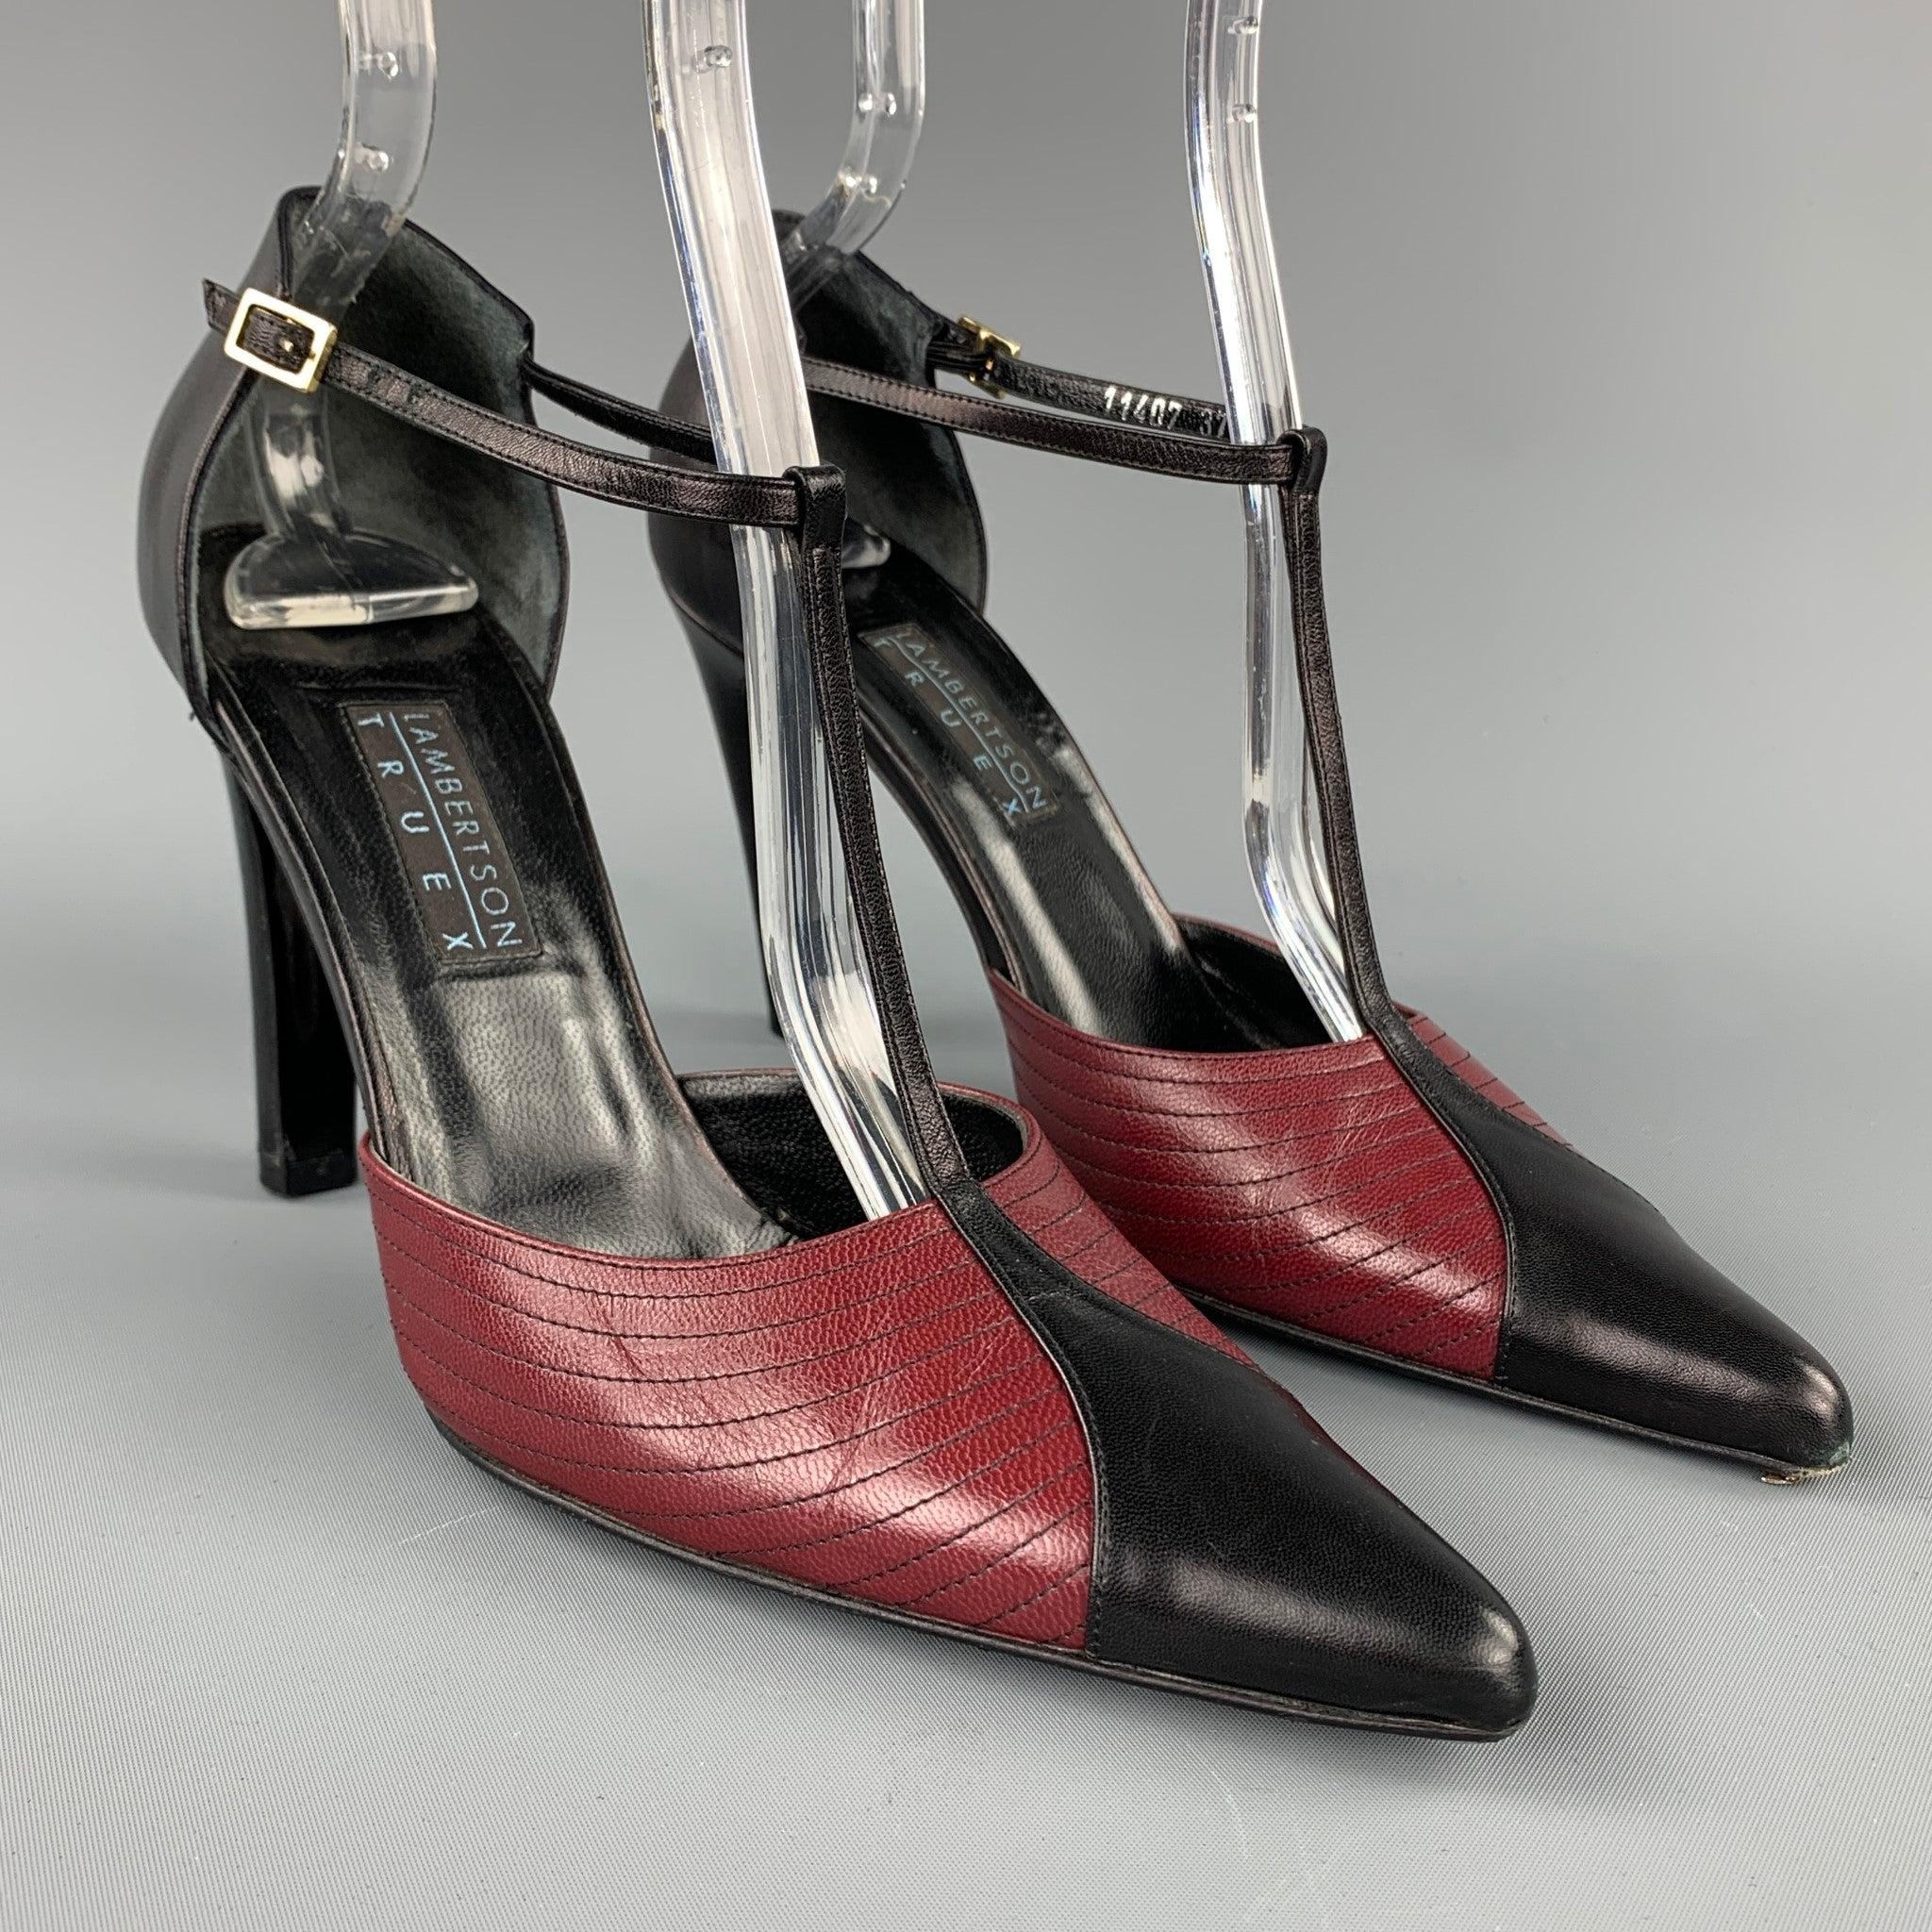 LAMBERTSON TRUEX pumps comes in black & red leather with top stitching featuring a t-strap, pointed toe, and a wooden heel. Made in Italy.Good
Pre-Owned Condition. 

Marked:   EU 37 

Measurements: 
  Heel:
4 inches  
  
  
 
Reference: